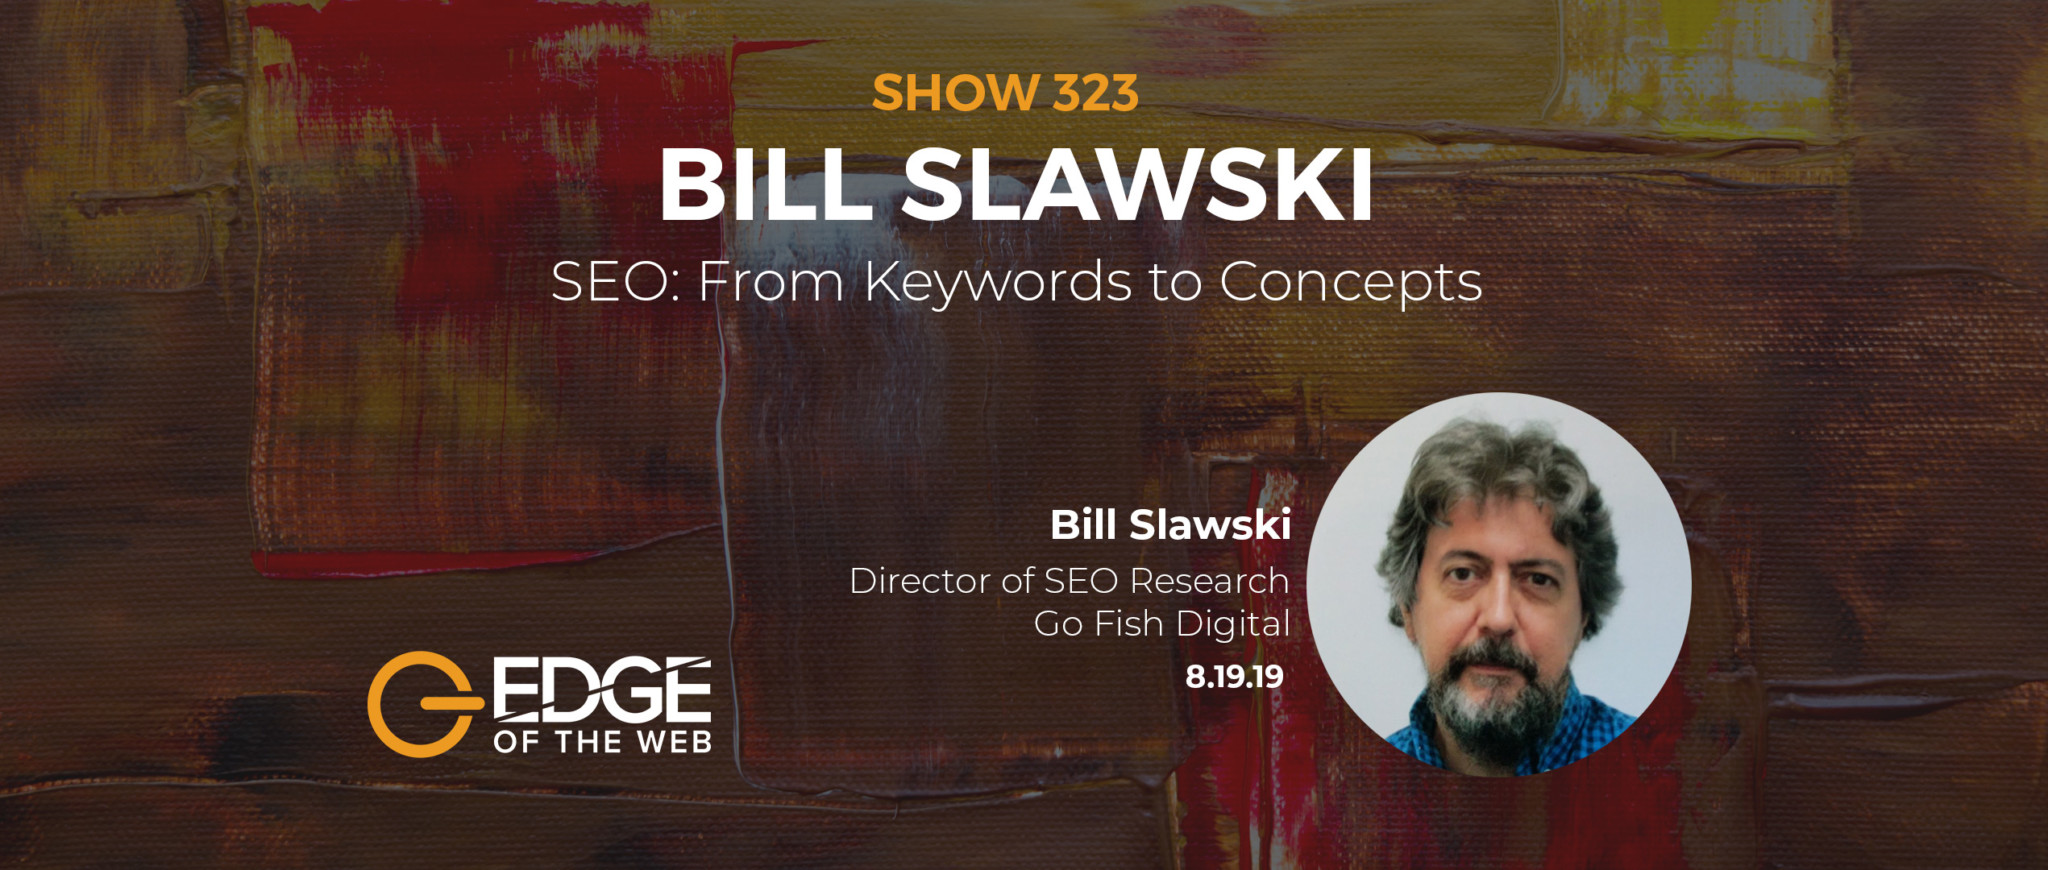 Show 323: SEO: From Keywords to Concepts, featuring Bill Slawski